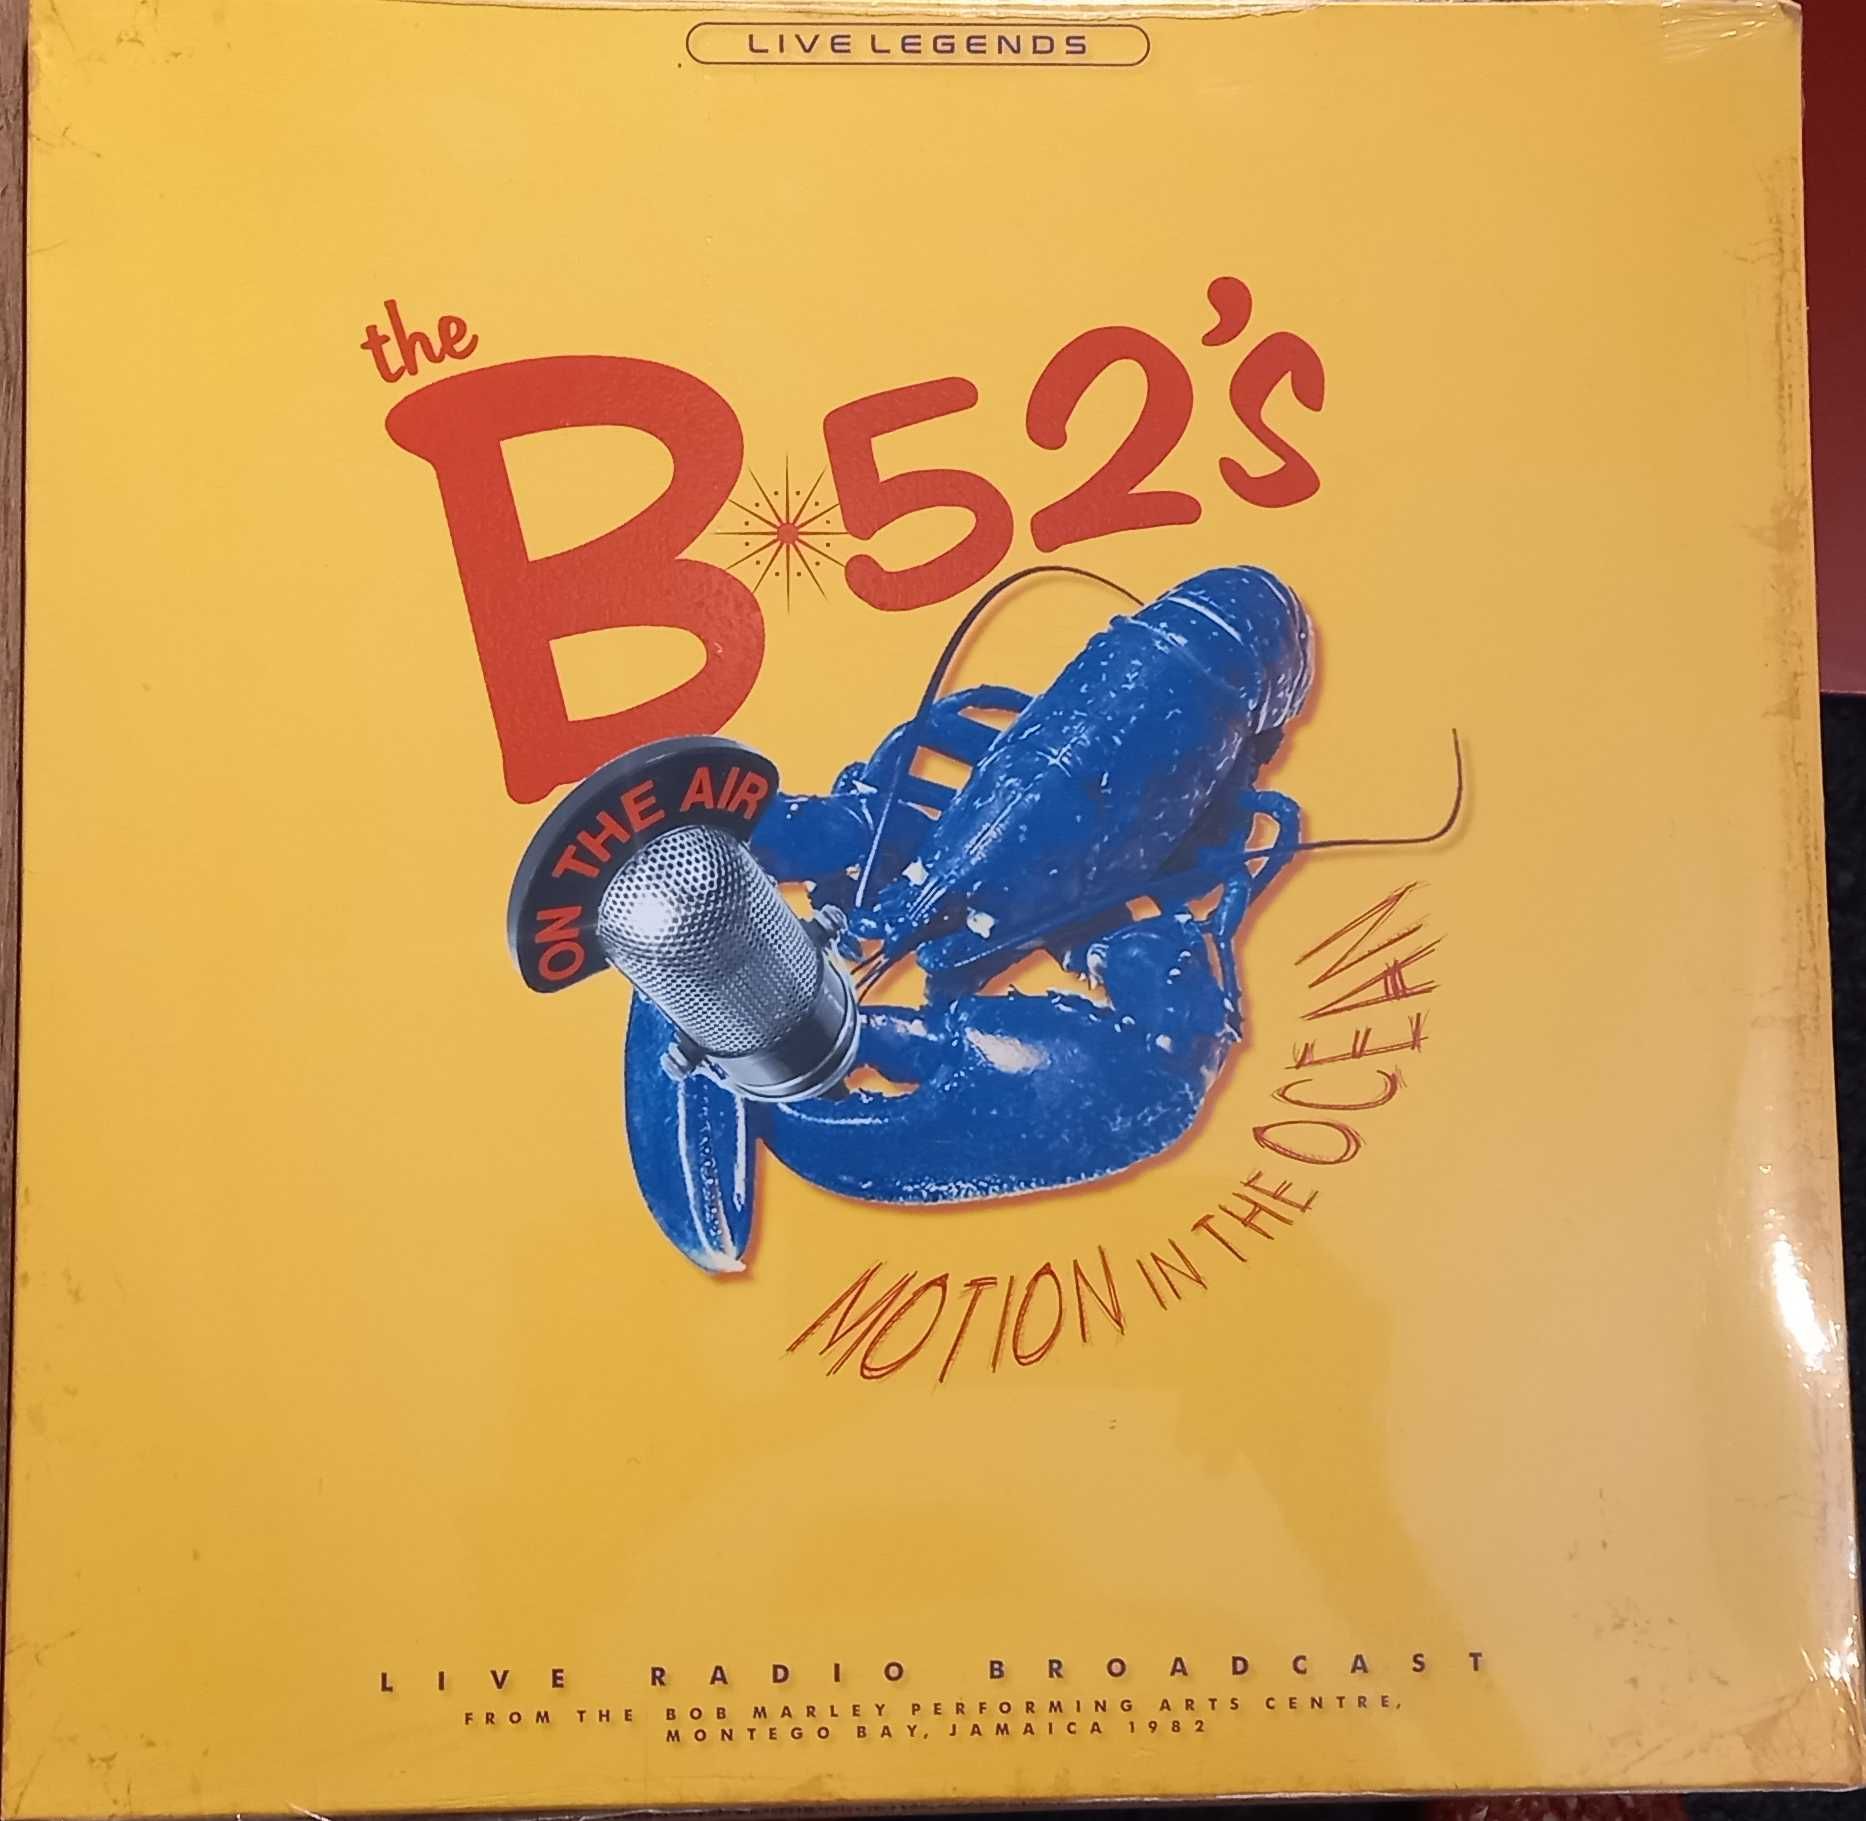 The B-52'S - Motion In The Ocean